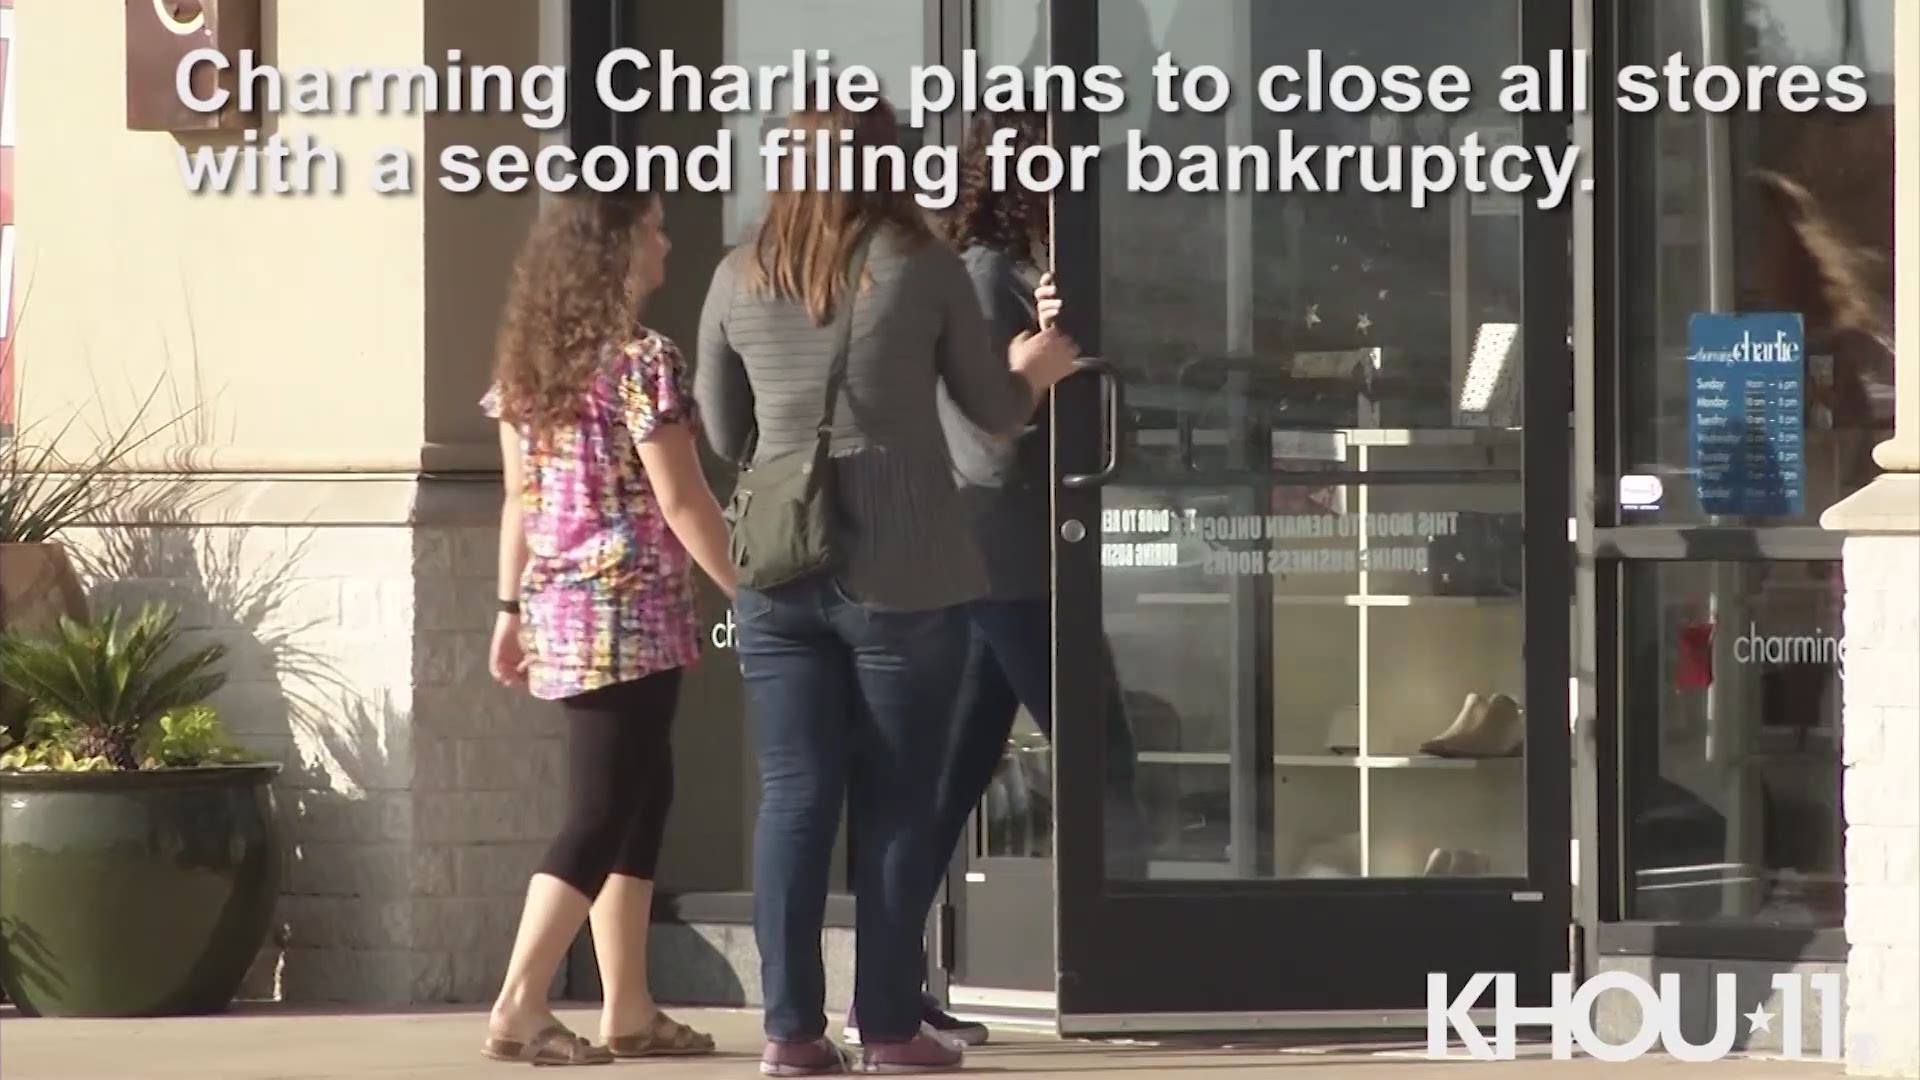 Houston-based Charming Charlie has filed for Chapter 11 for a second time and will cease all business operations, according to multiple reports on Thursday.